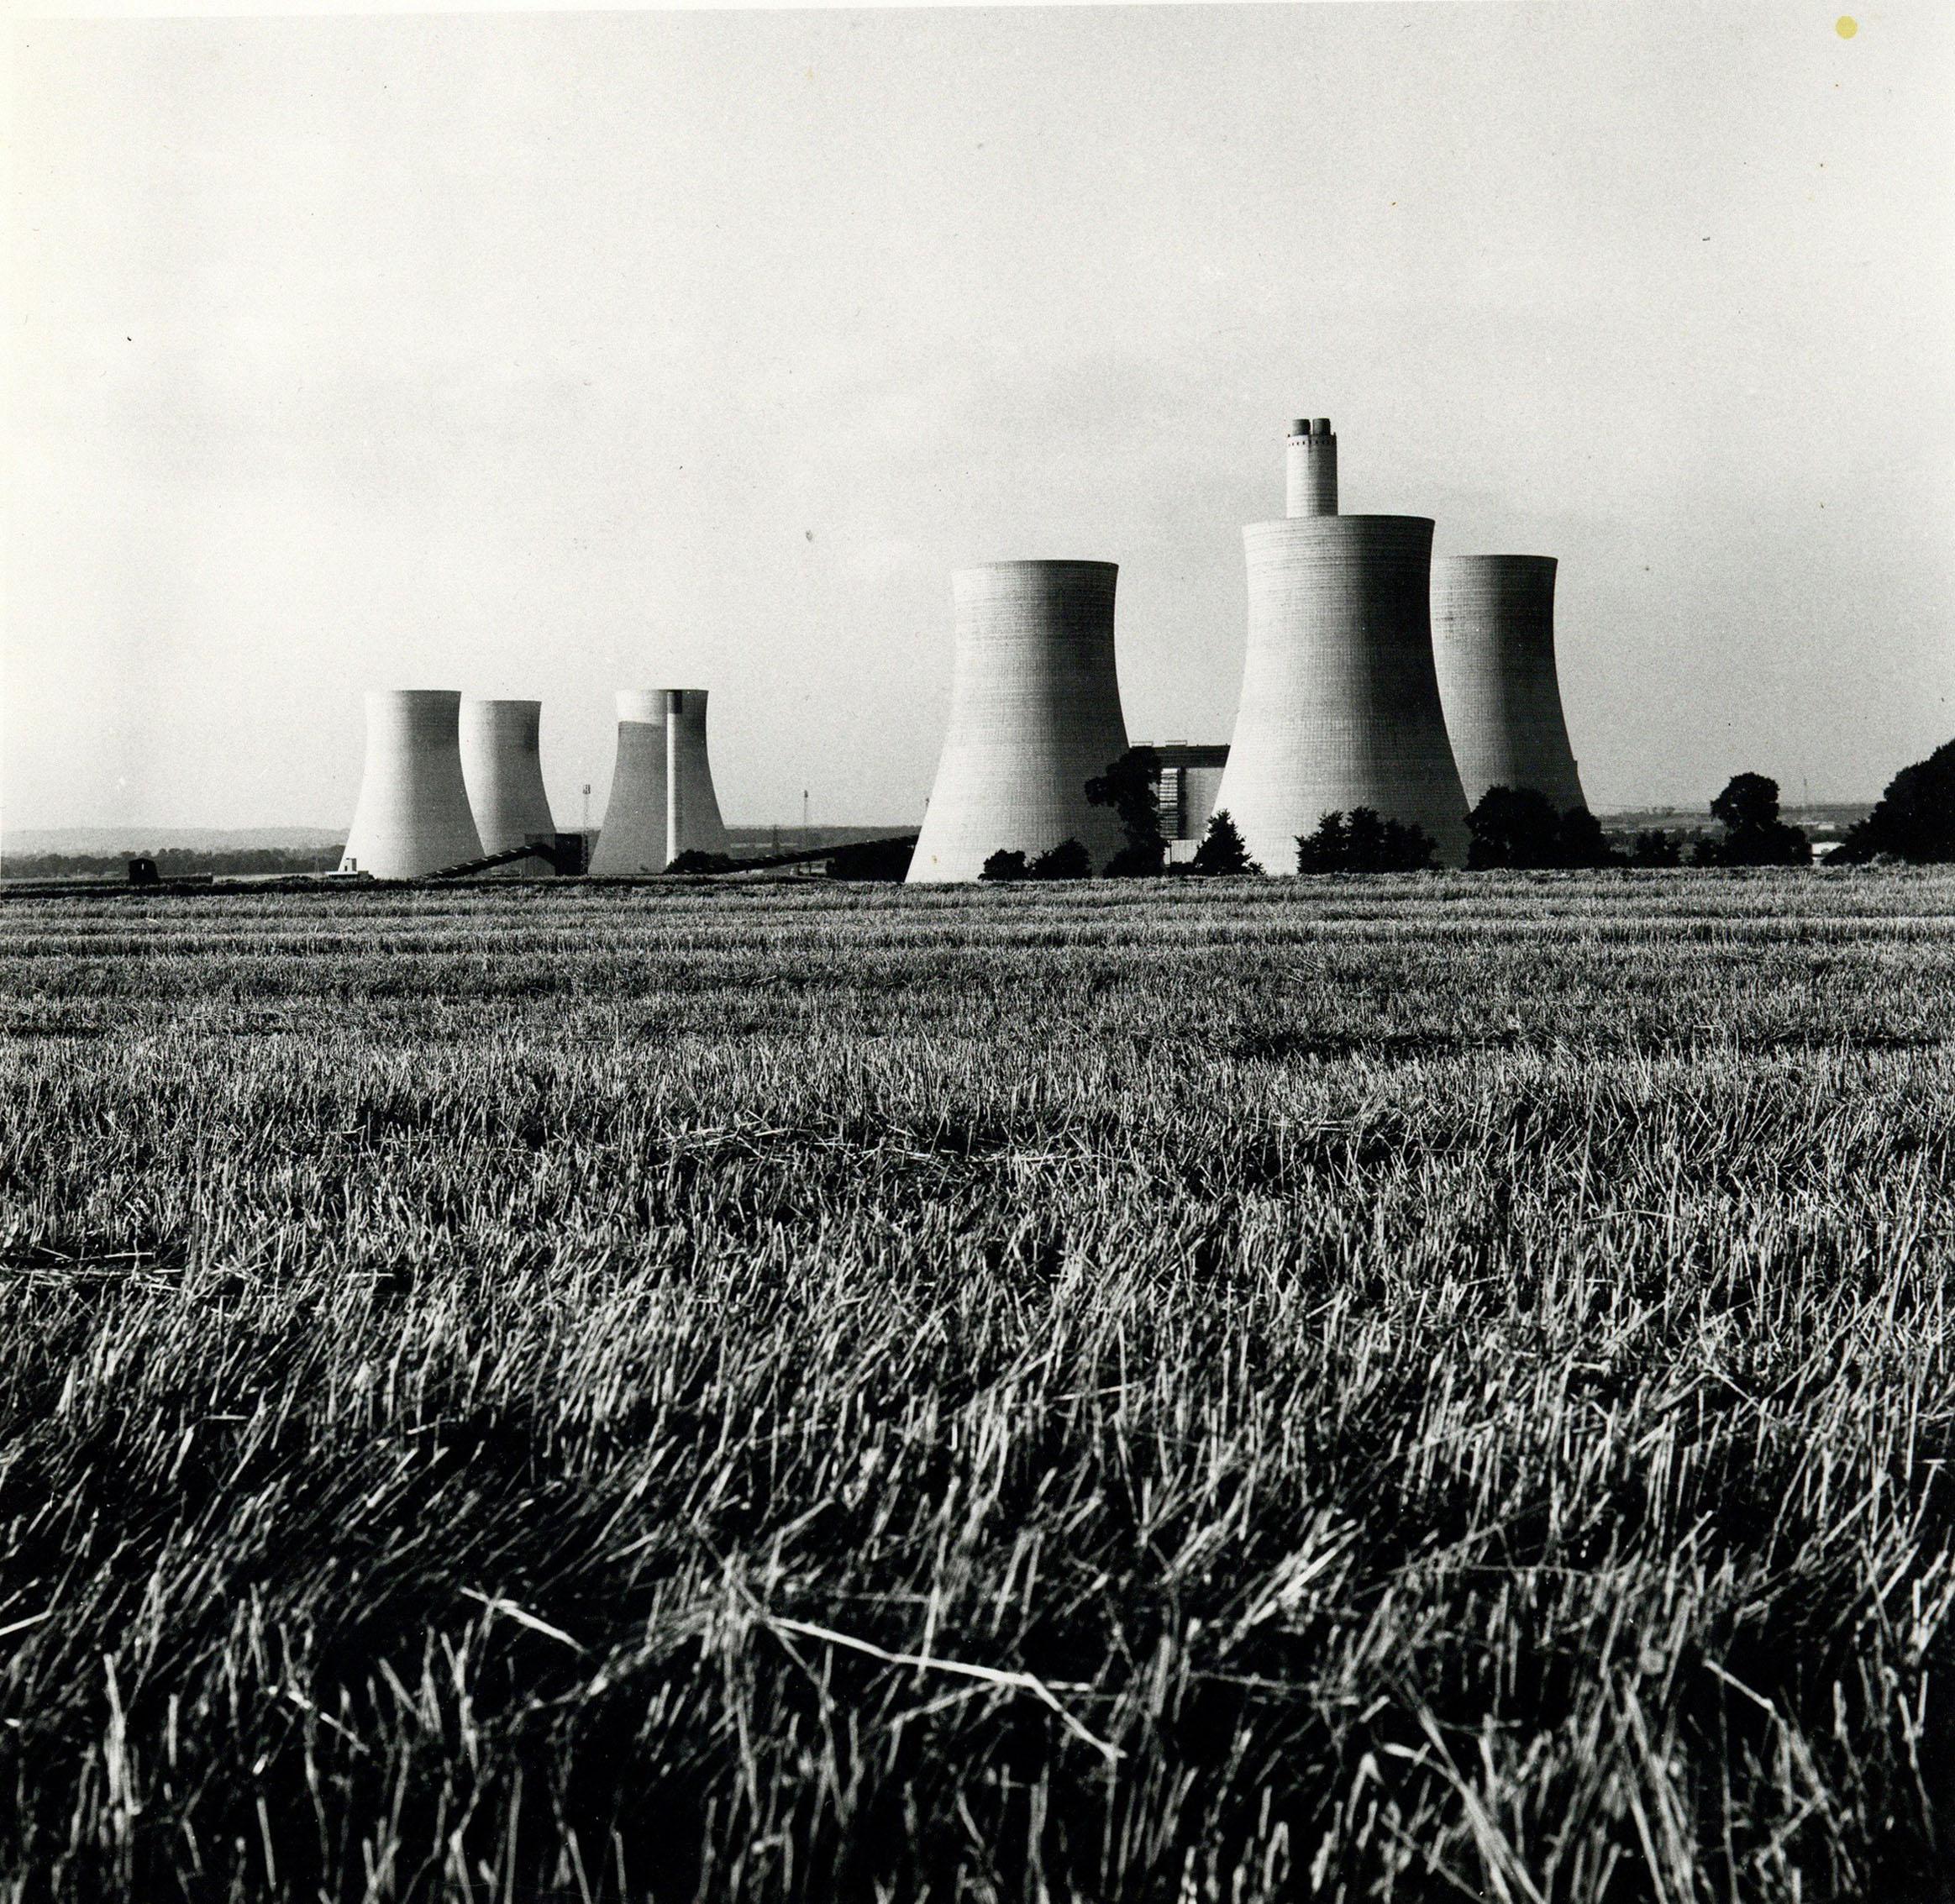 Rosemary Ellis (1910-1988)
Cooling Towers
Original photography for Pipes and Wires in the Outlooks and Insights series published by Bodley Head, composed by Rosemary & Charlotte Ellis.
Silver Gelatin Photograph Print
13x13 cm

Rosemary Ellis was